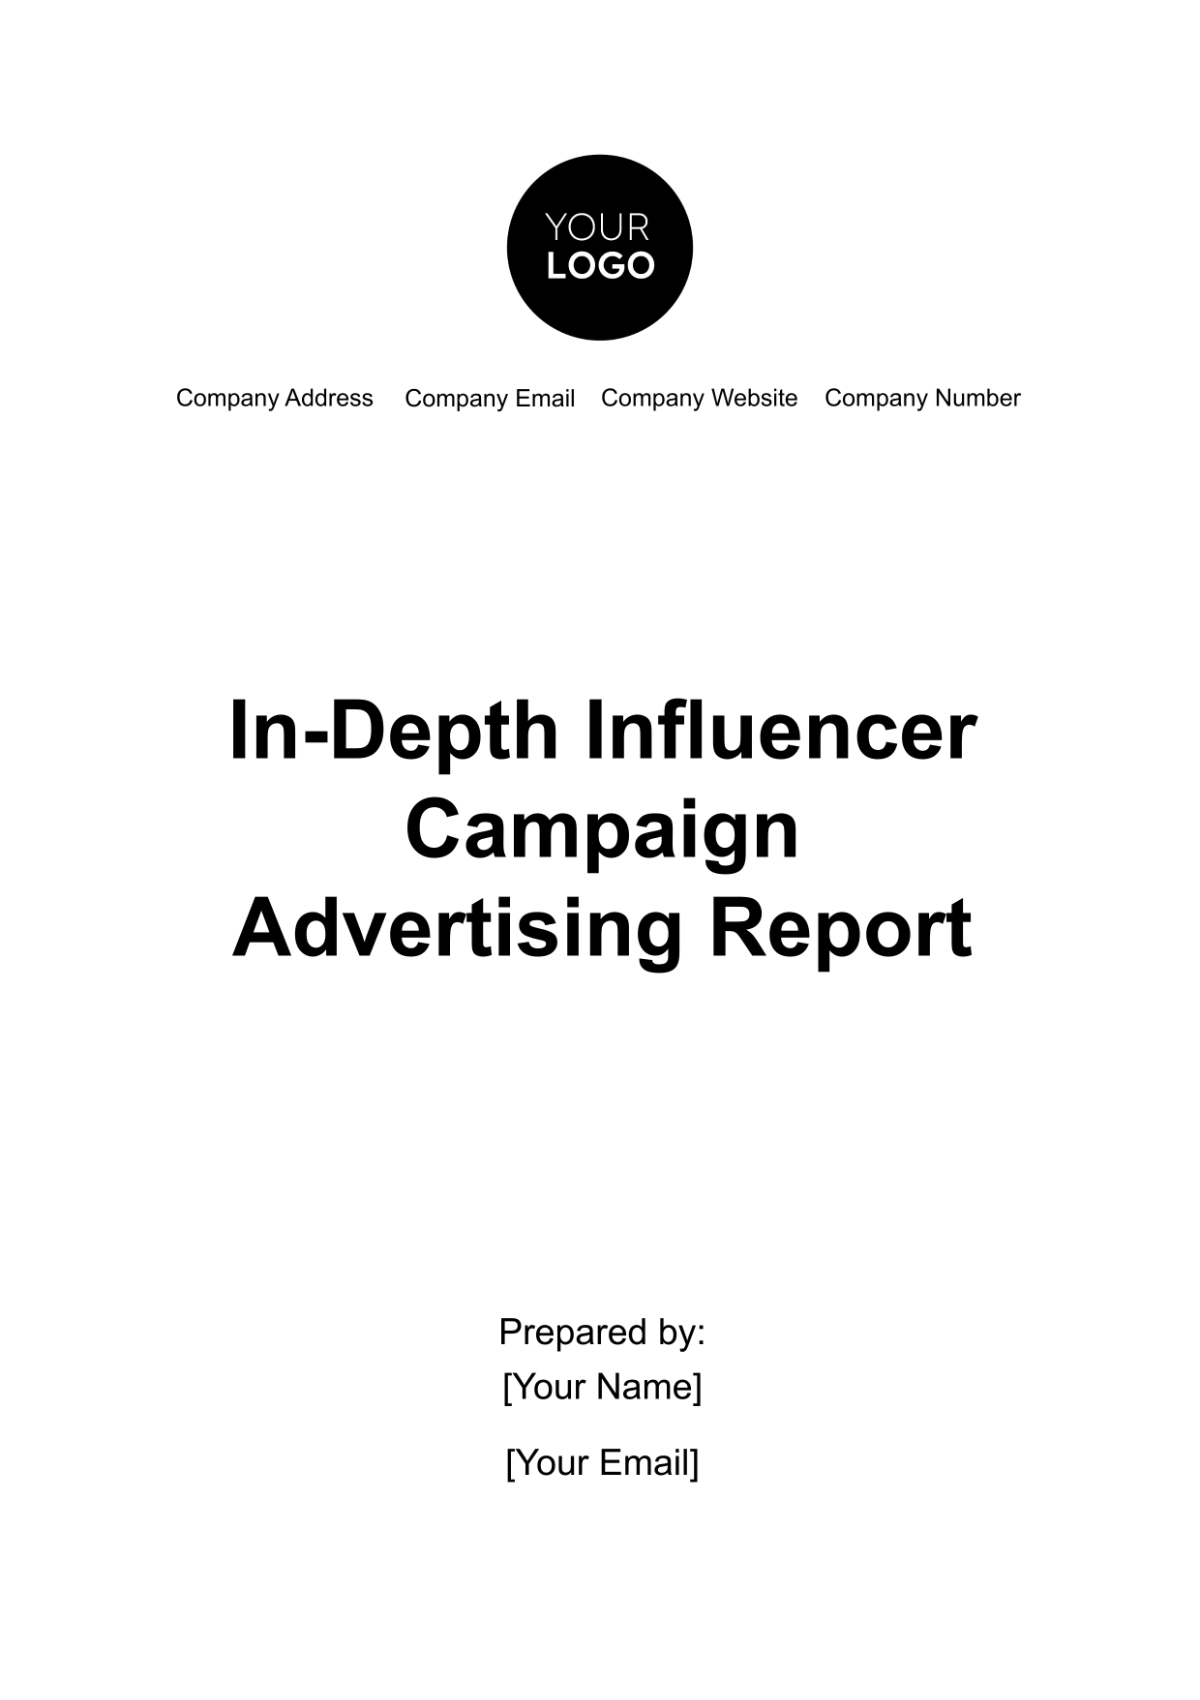 Free In-Depth Influencer Campaign Advertising Report Template